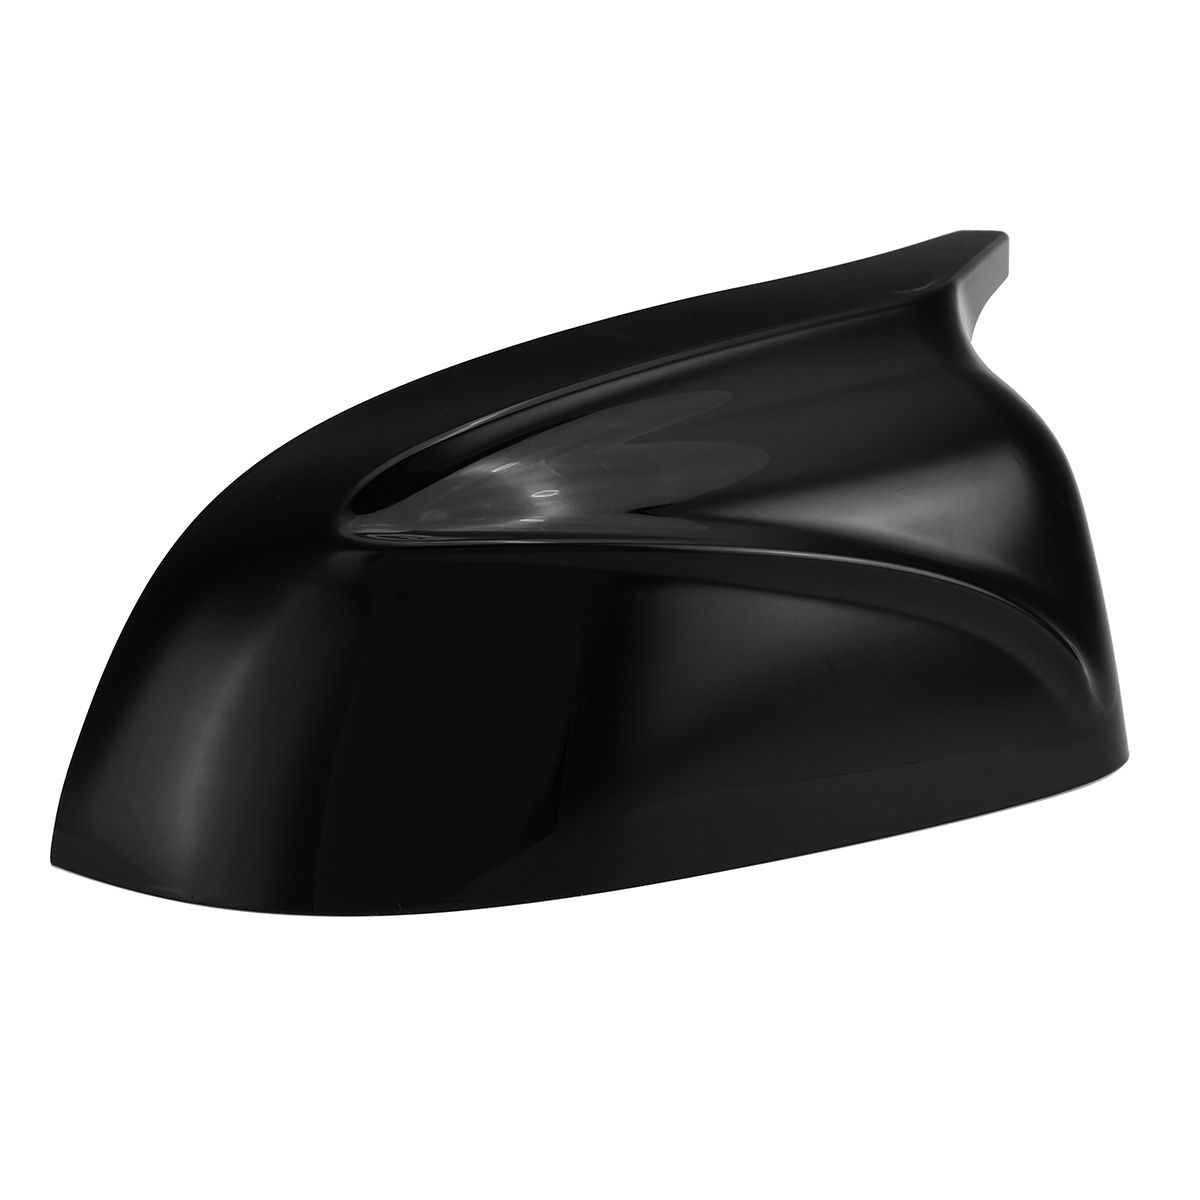 M-Style-Glossy-Black-Replacement-Side-Mirror-Cover-Caps-For-BMW-X3-X4-X5-X6-X7-G01-G02-G05-G06-G07-2-1754888